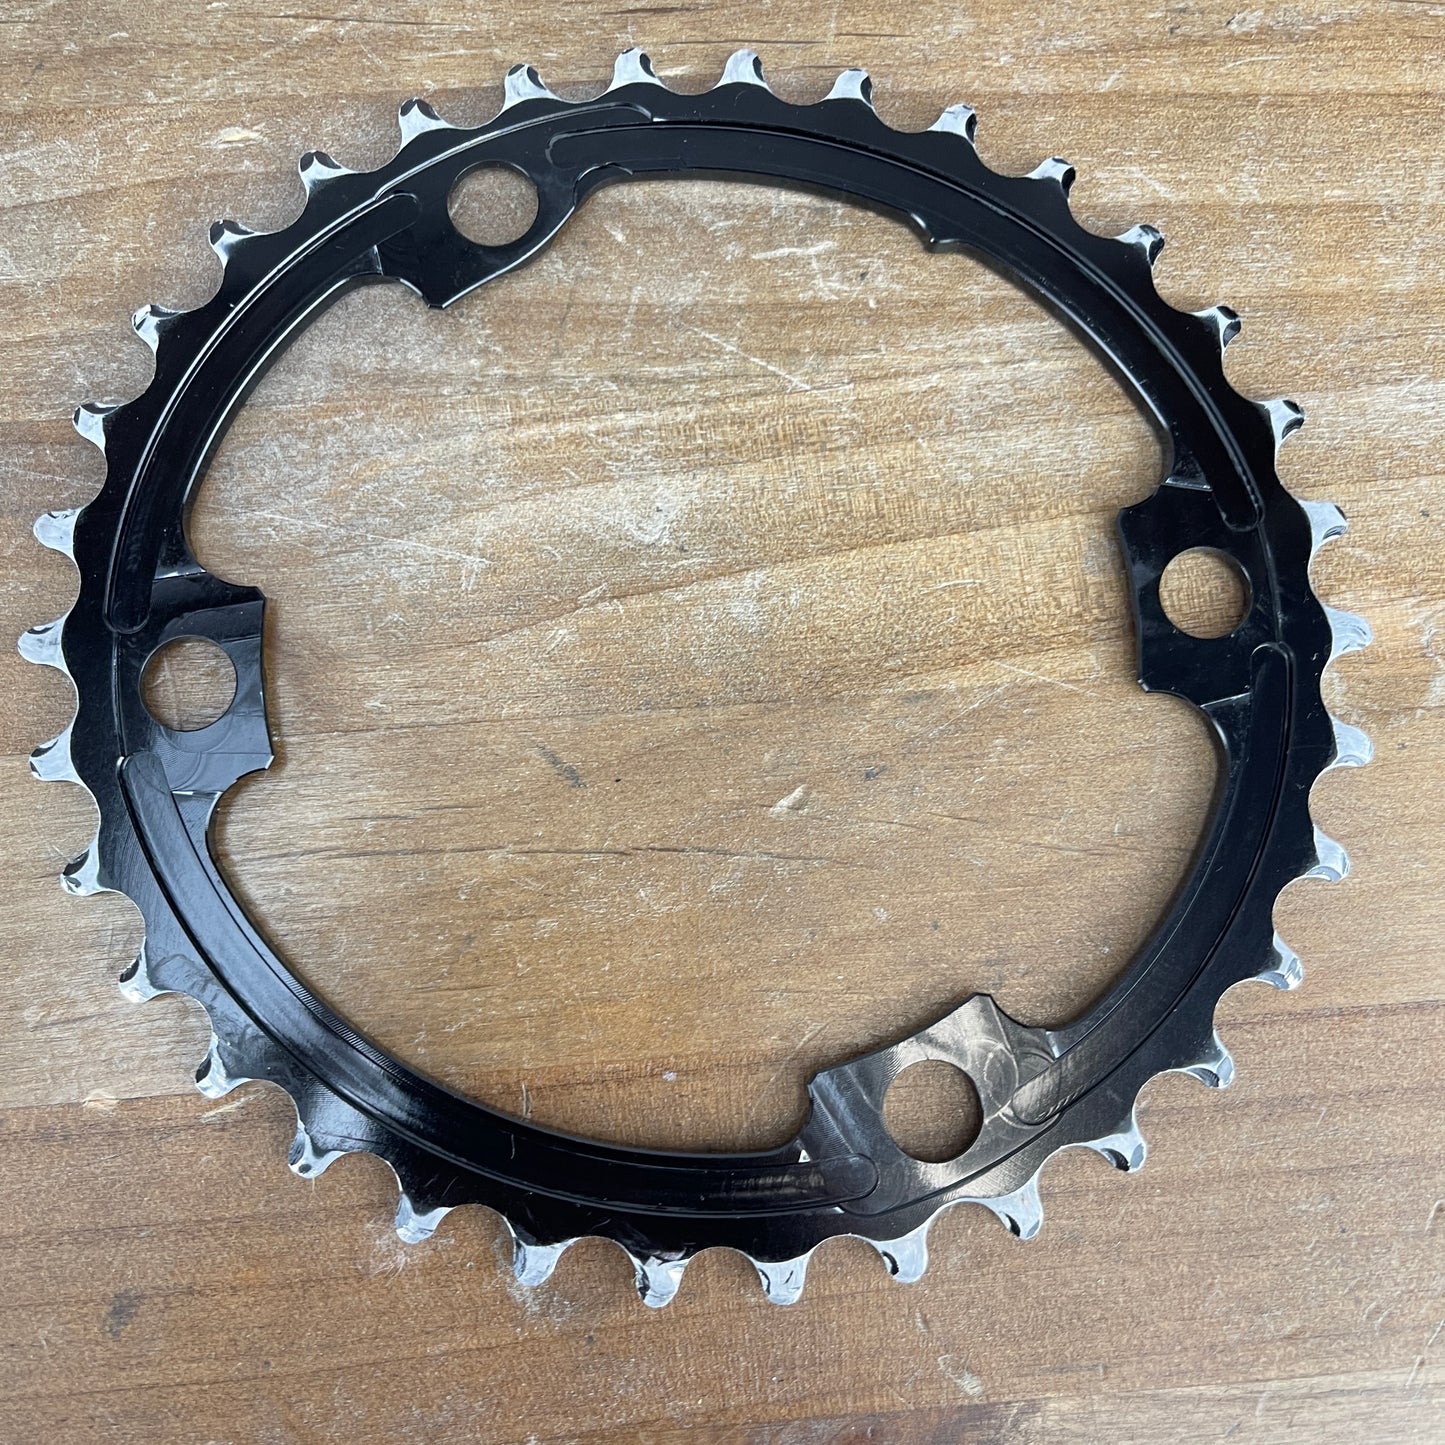 Absolute Black 50/34t Oval Road Chainrings for R9100 & Ultegra R8000 & R7000